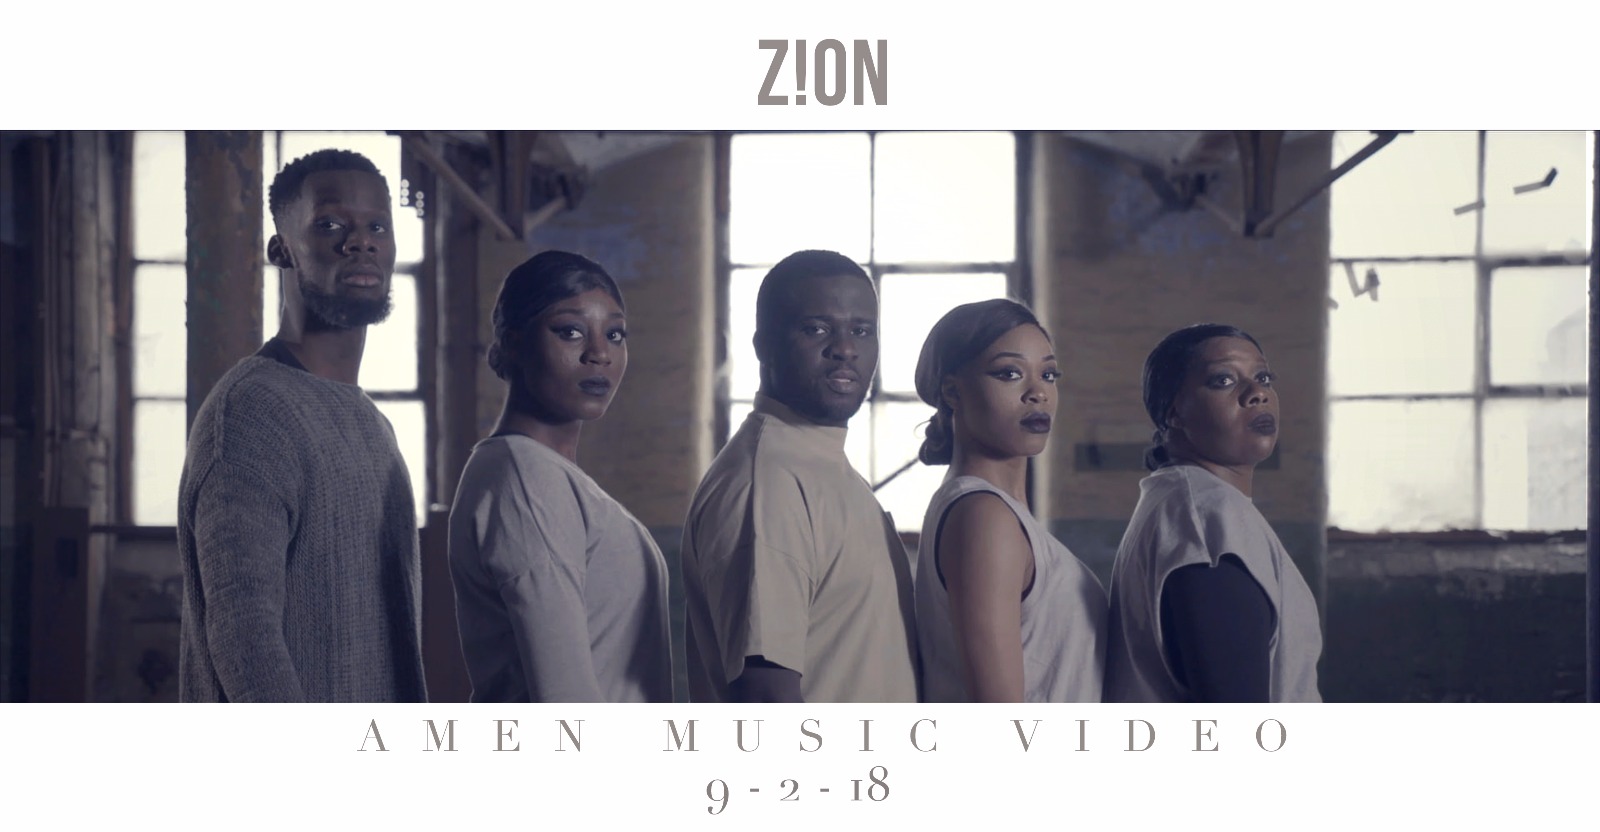 Manchester Based Artist Zion Unveils Video For 'Amen' Single